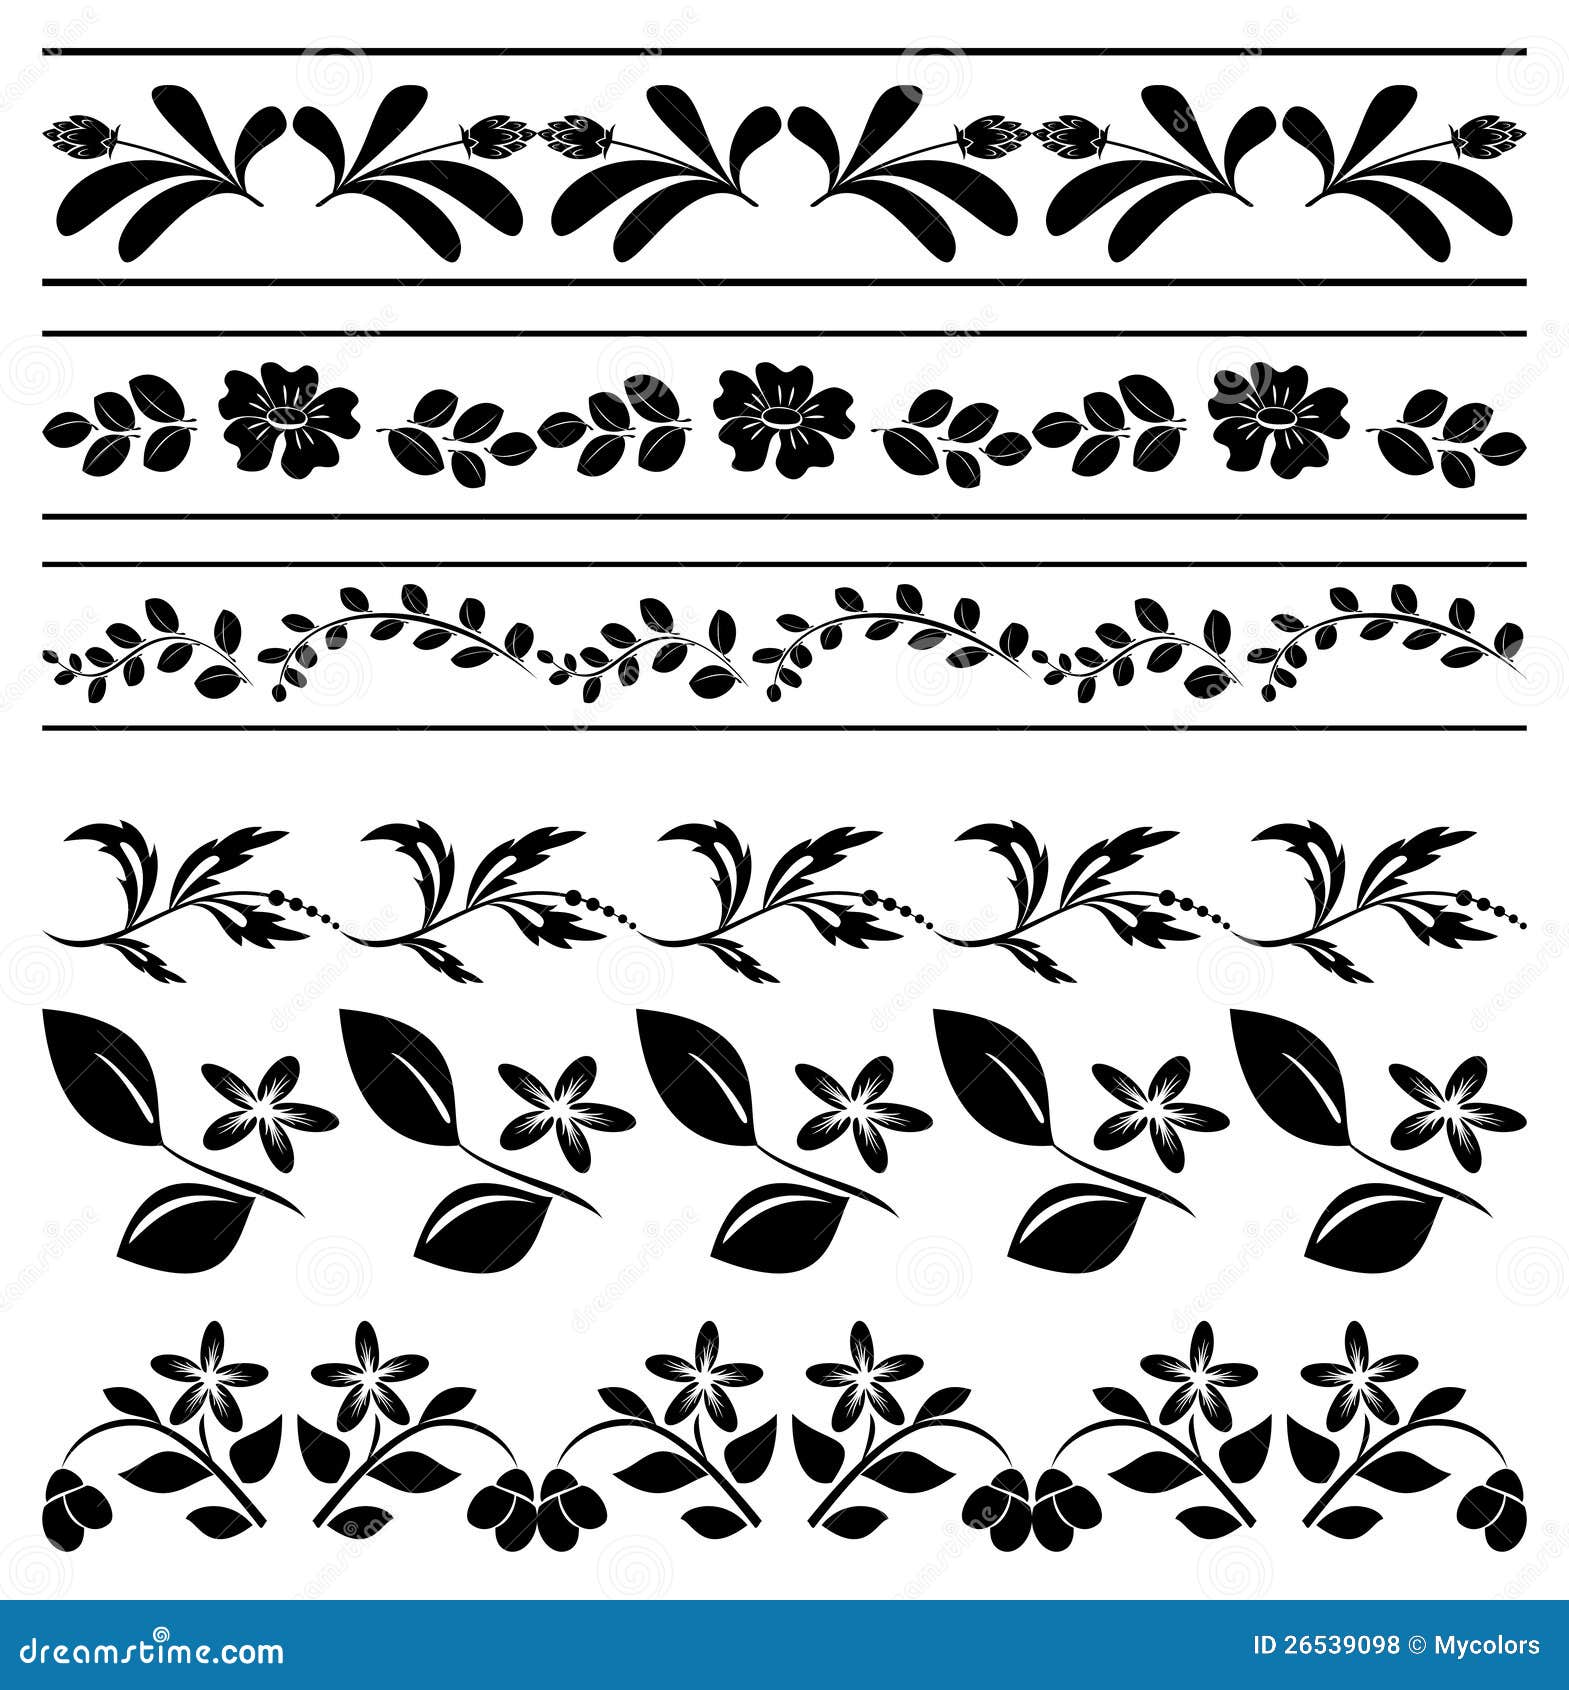 floral borders - black tracery - 